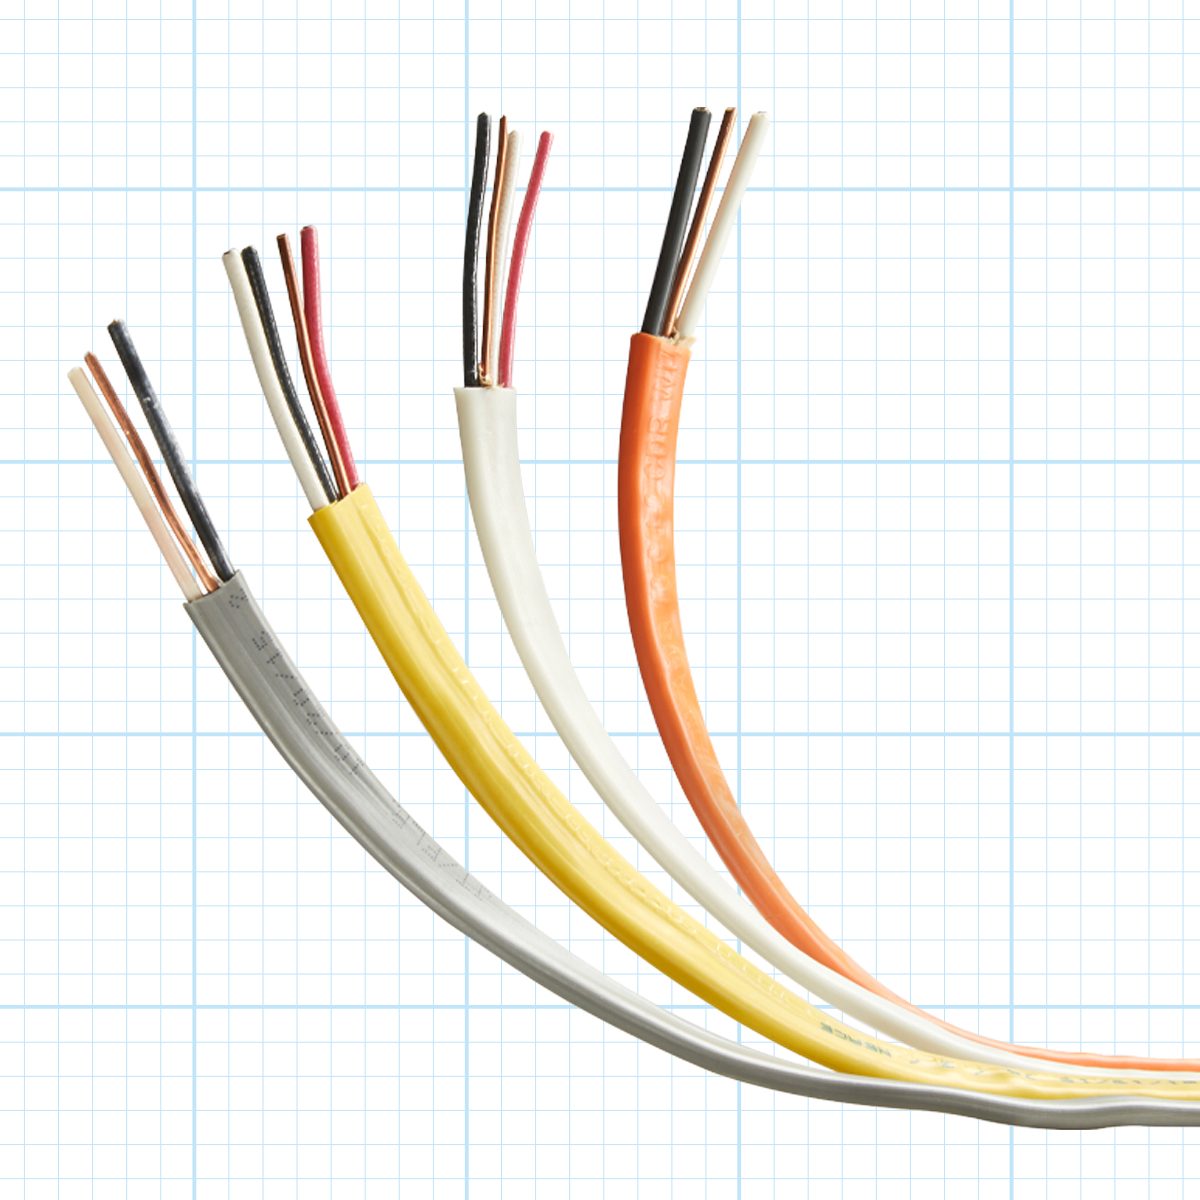 House Electrical Wiring: What You Need to Know